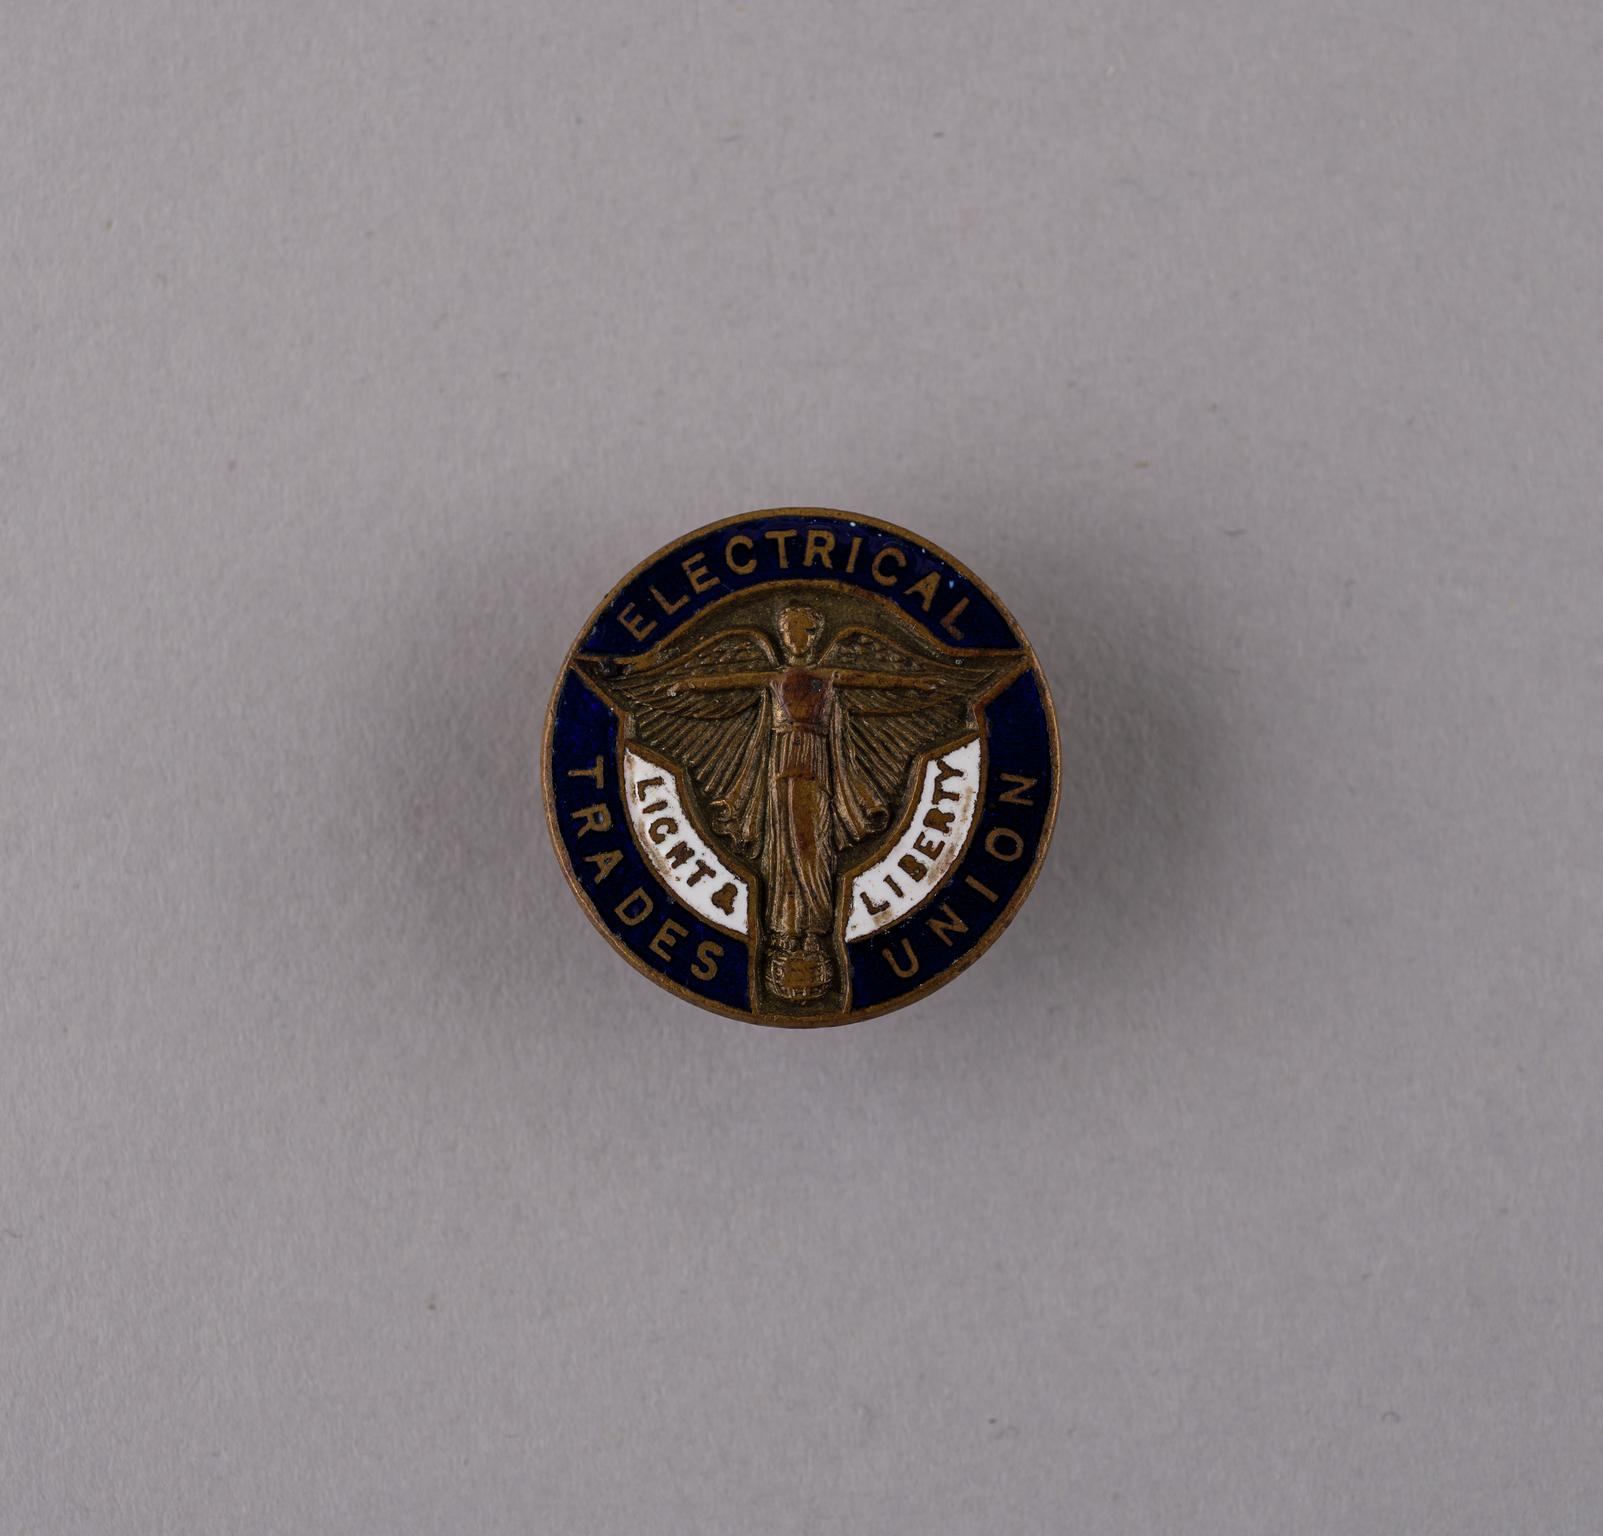 Electrical Trade Union, badge